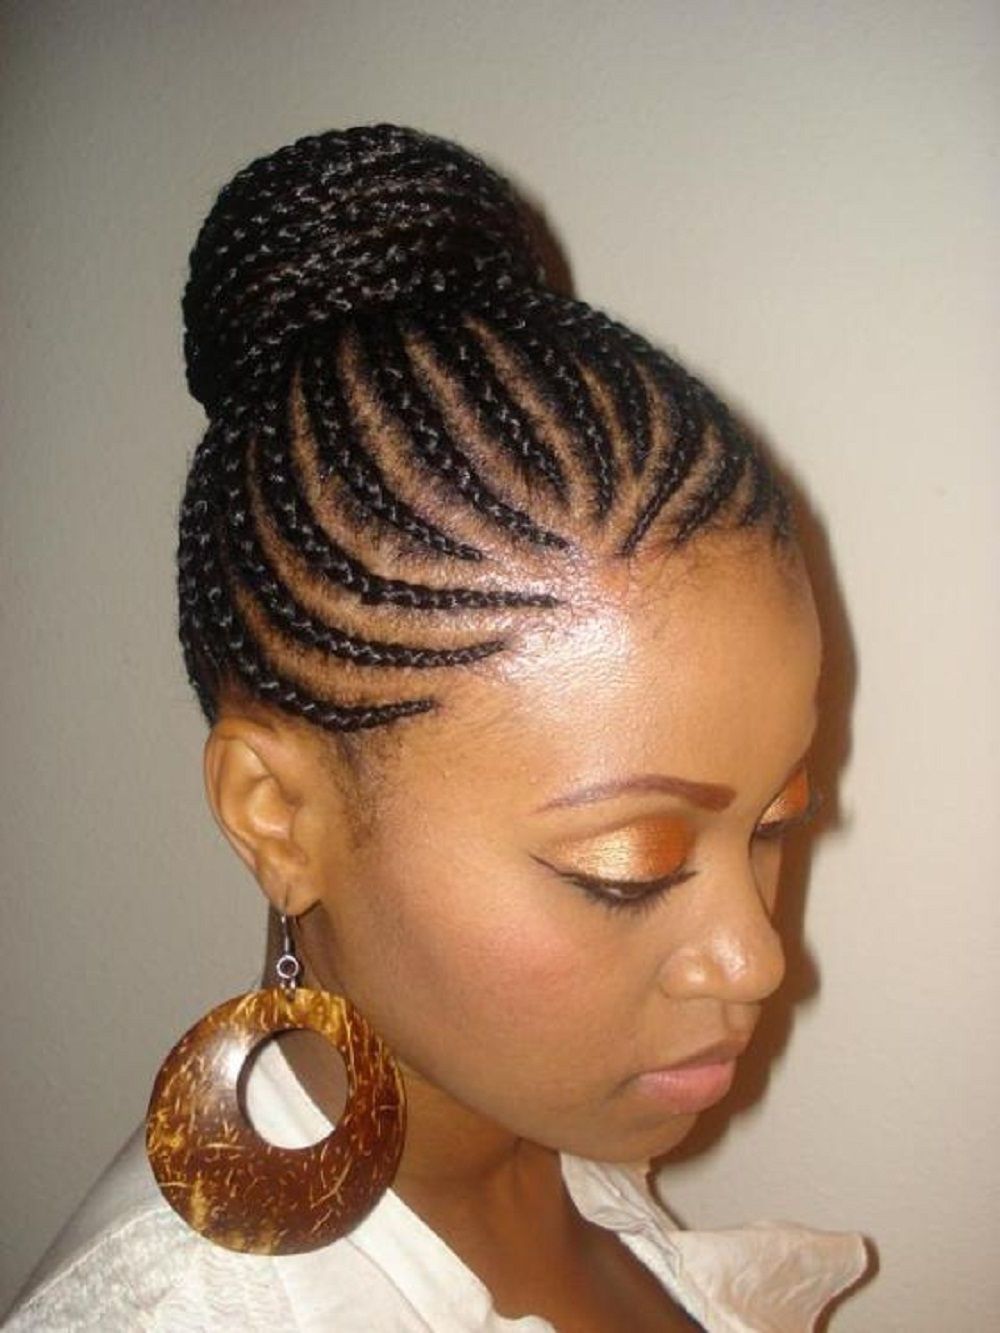 Cute+braided+hairstyles+for+black+teenagers (View 6 of 15)